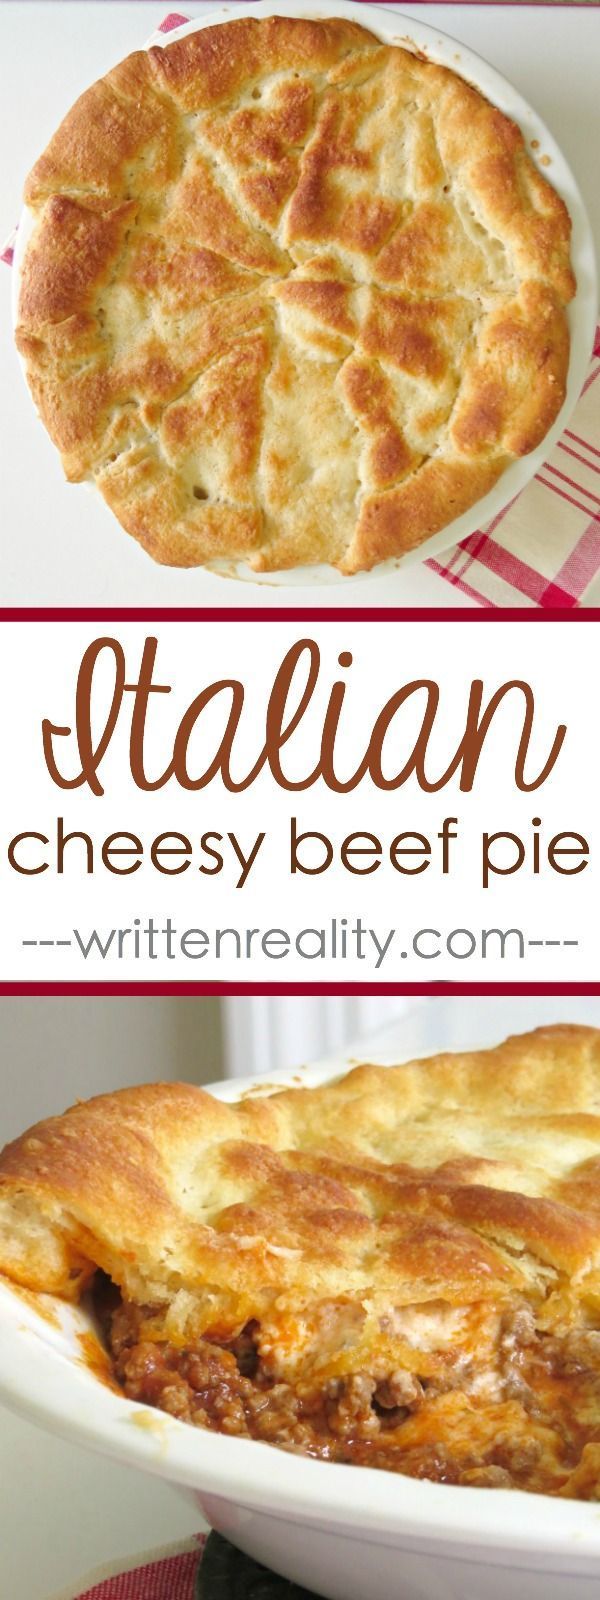 Ground Beef Pie Recipe : This Italian ground beef casserole is filled with ground beef, tomato sauce, and cheese. Then it’s